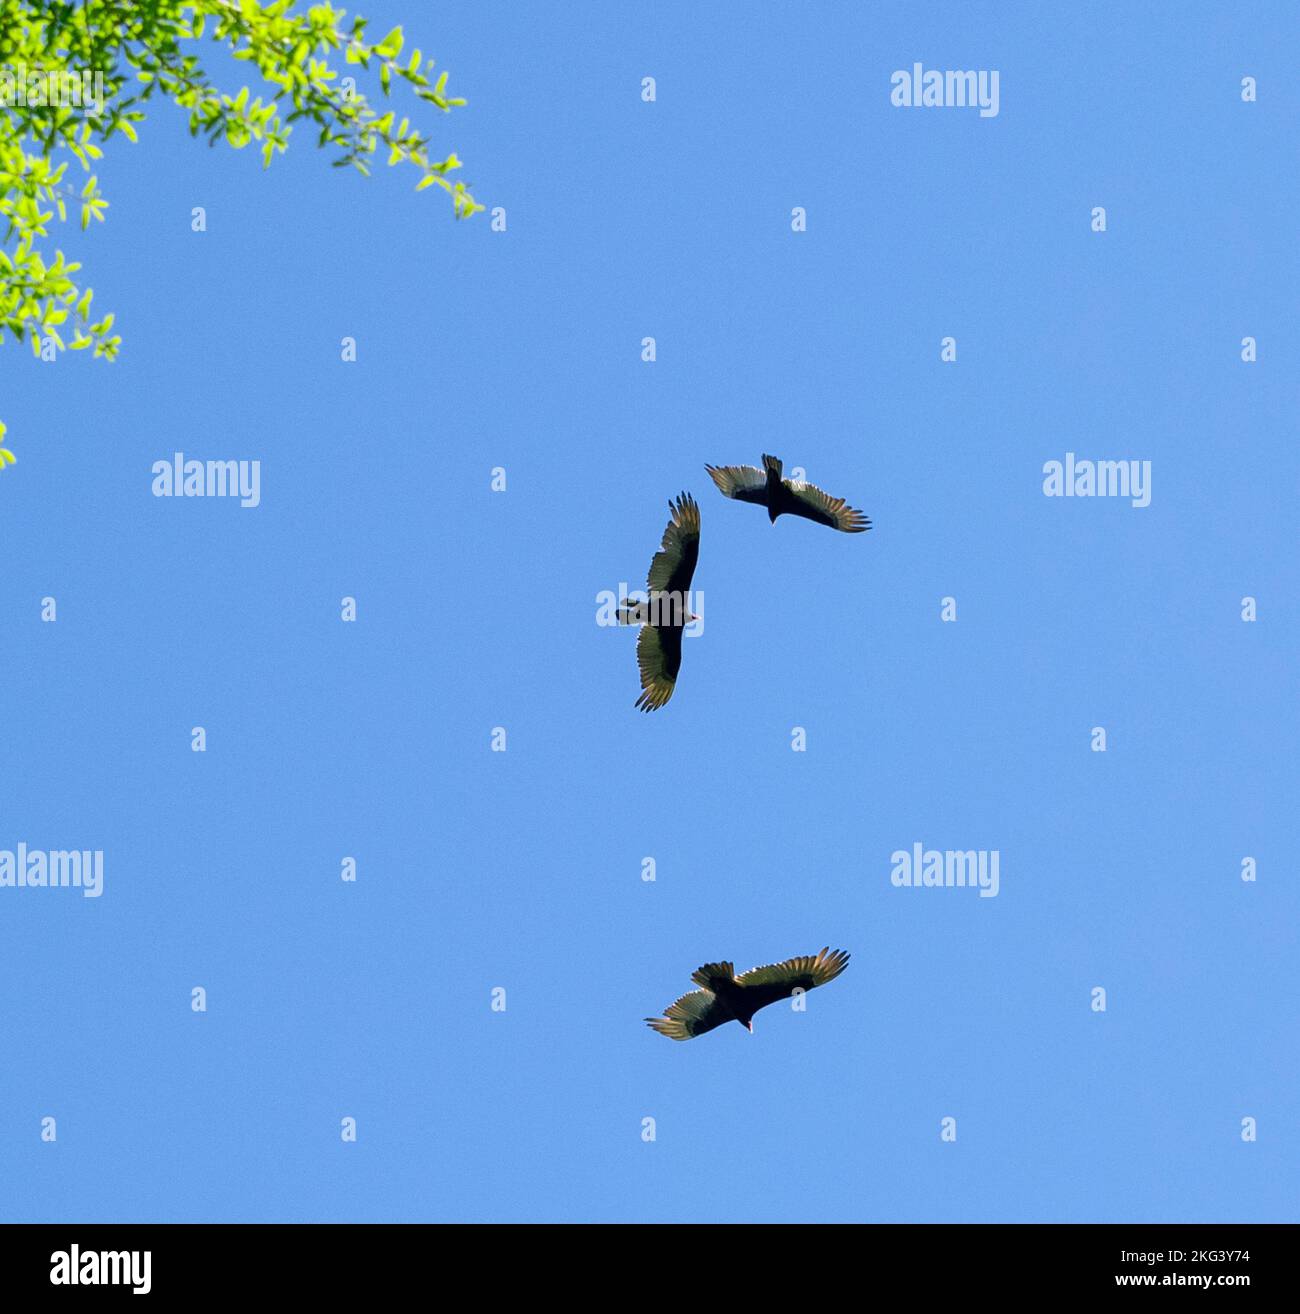 Turkey Vultures circling around, above Spring growth of laurel oak tree, in North Central Florida. Stock Photo